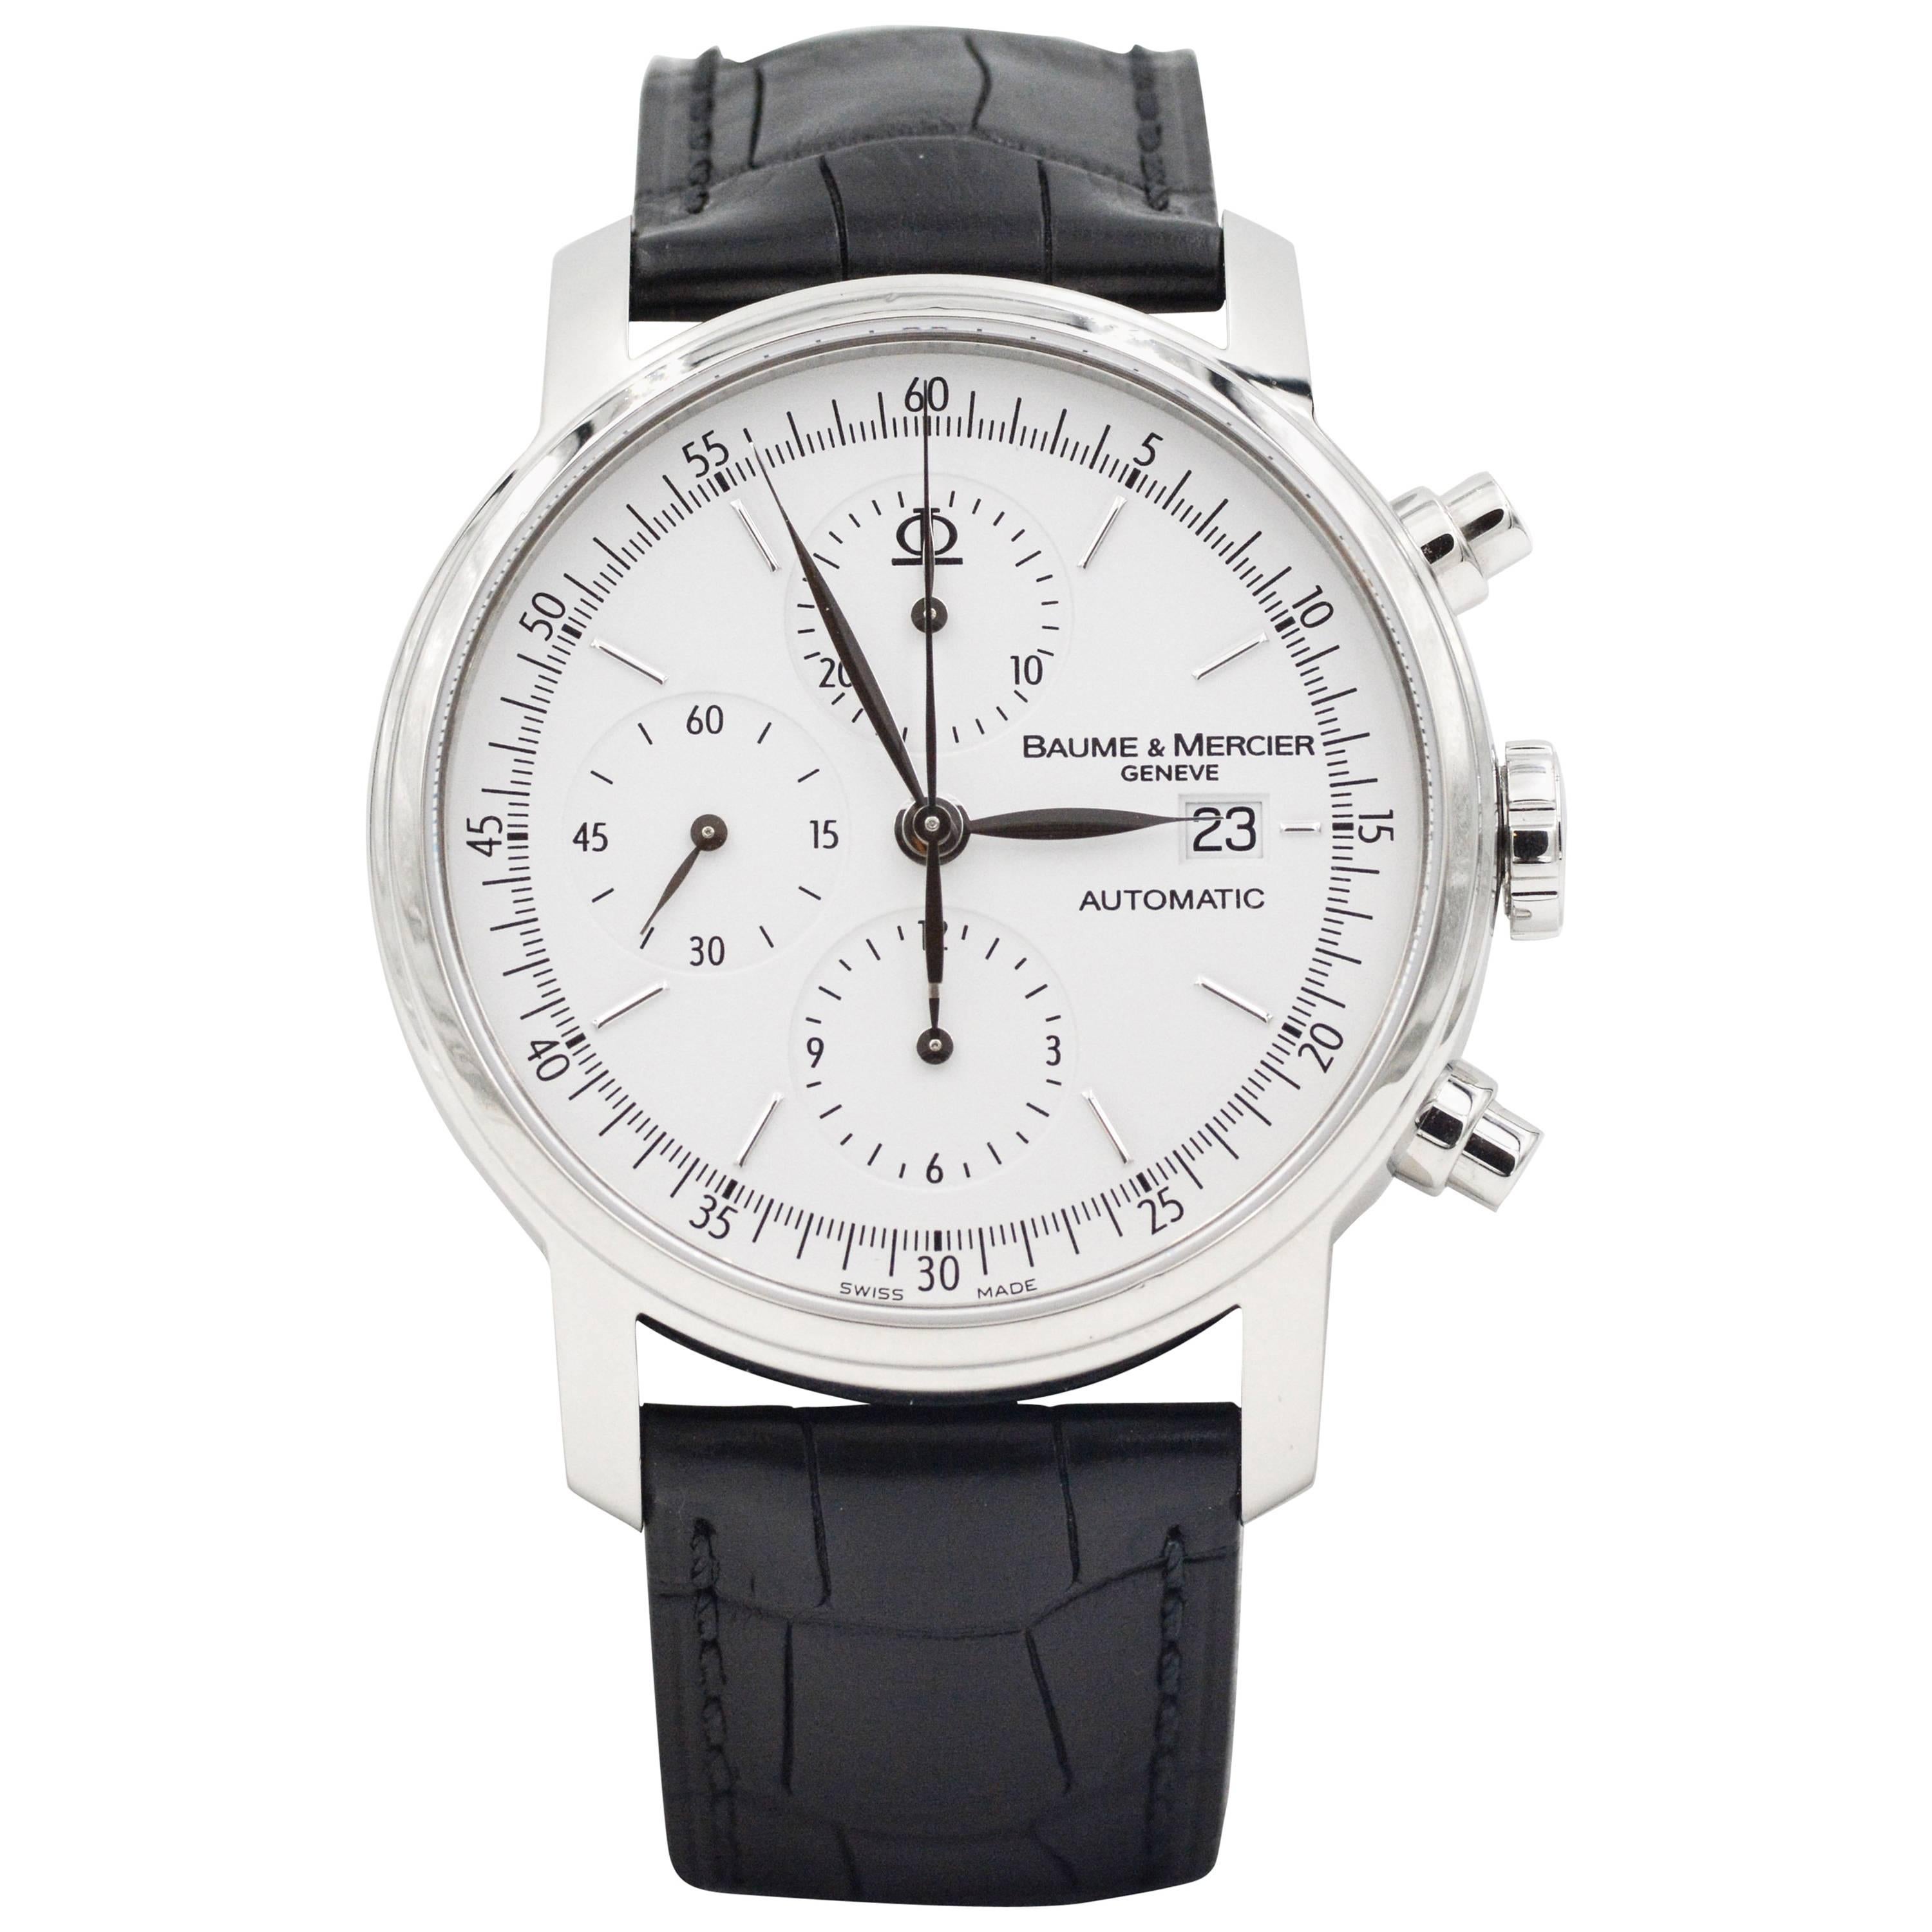 Baume & Mercier Stainless Steel Chronograph Automatic Mechanical Wristwatch